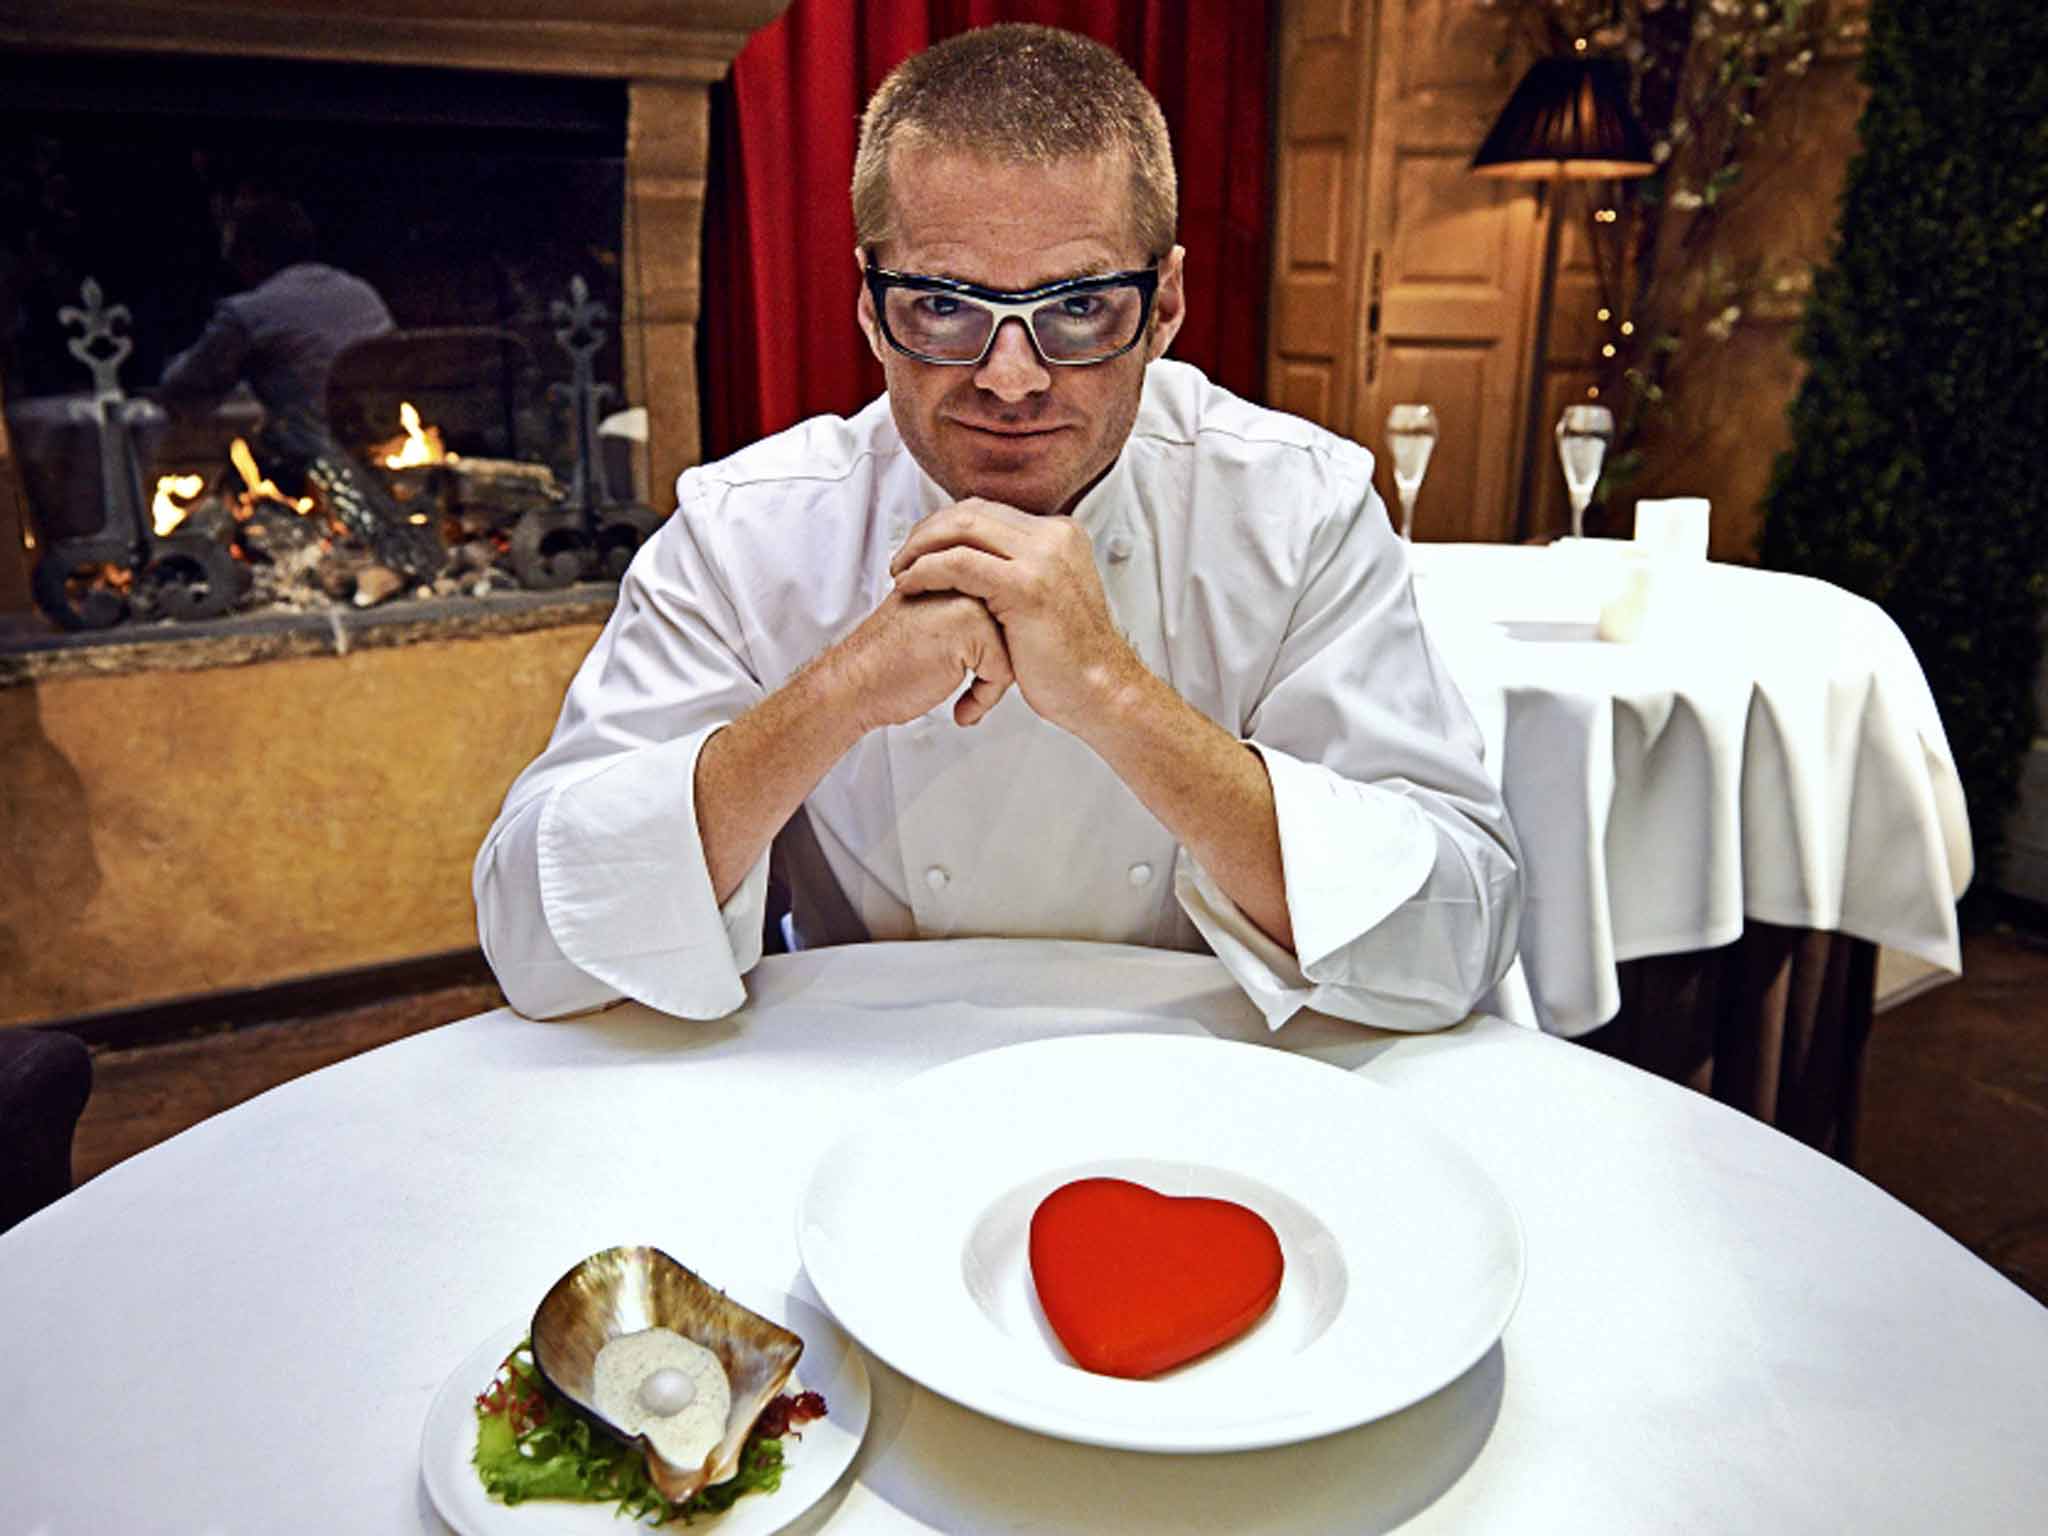 Eat your heart out: 'Heston's Recipe for Romance'